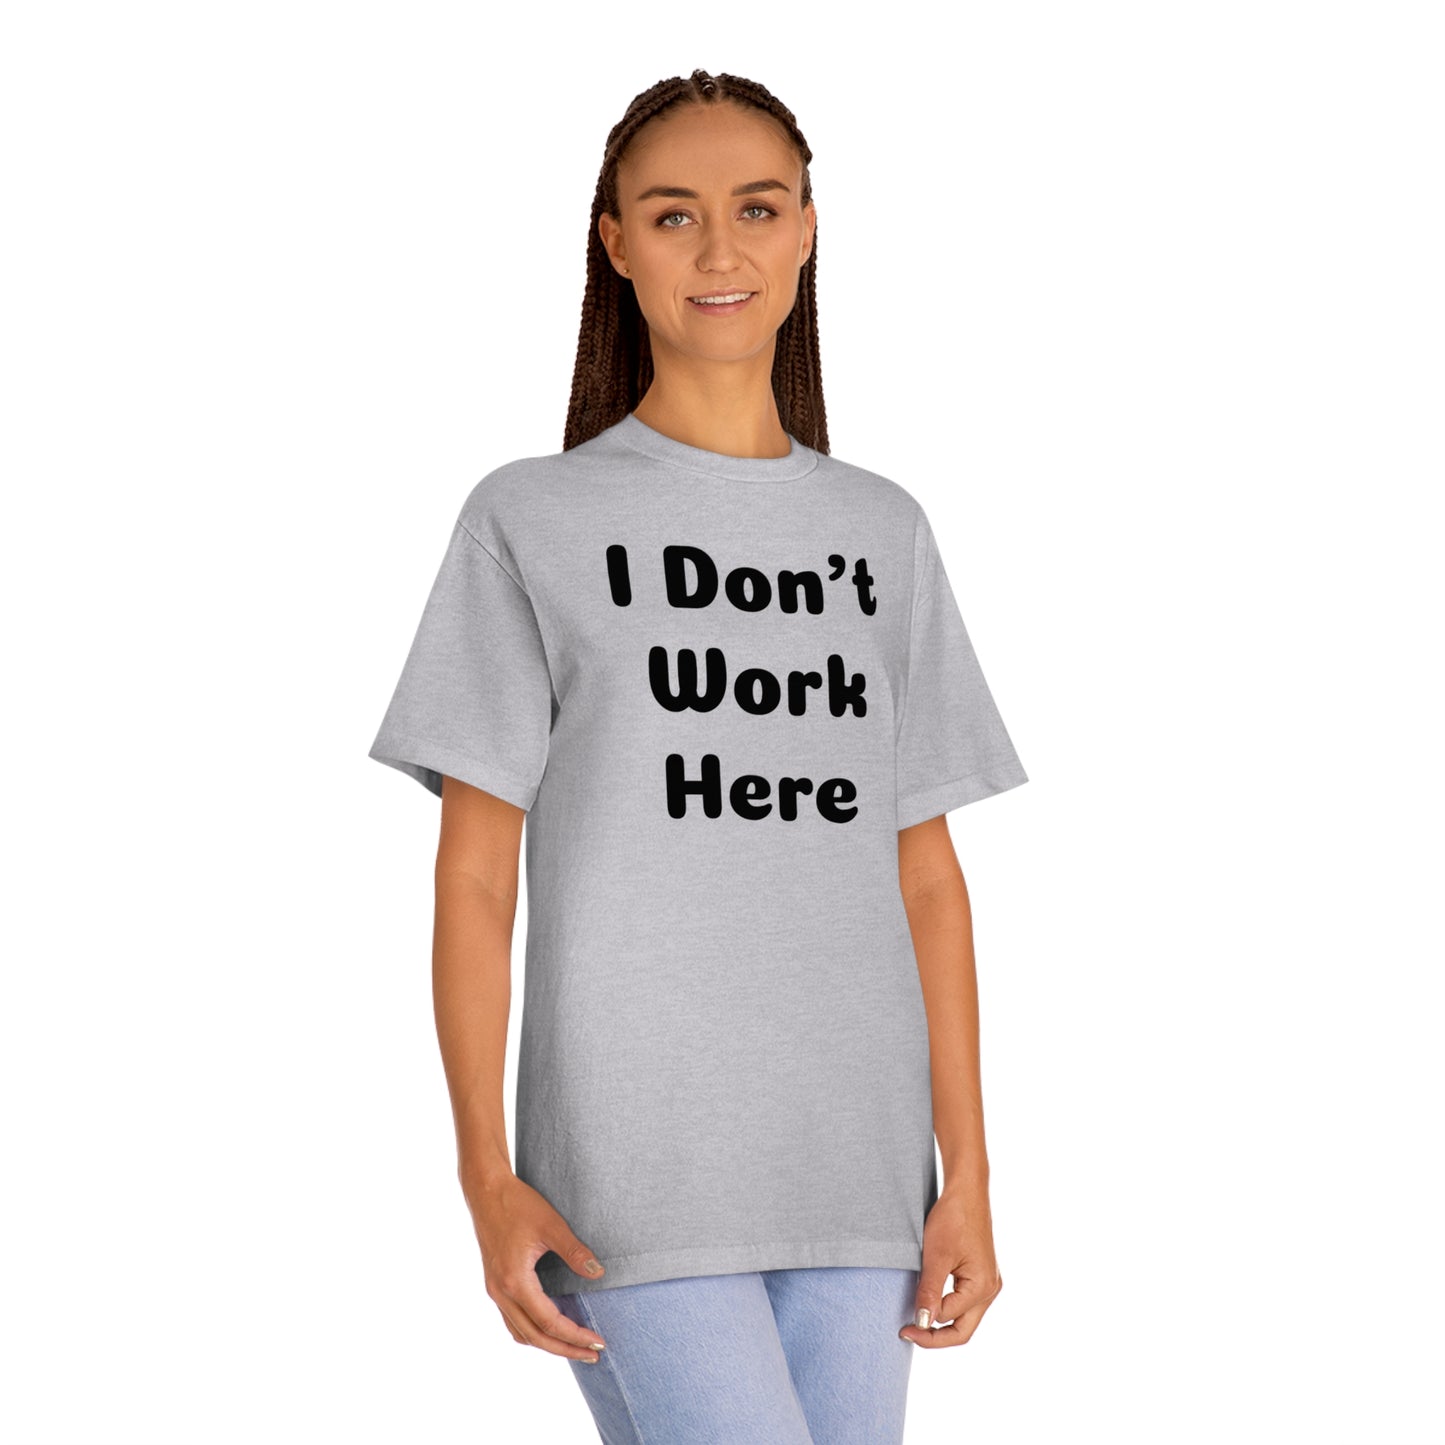 I Don't Work Here T-shirt Funny